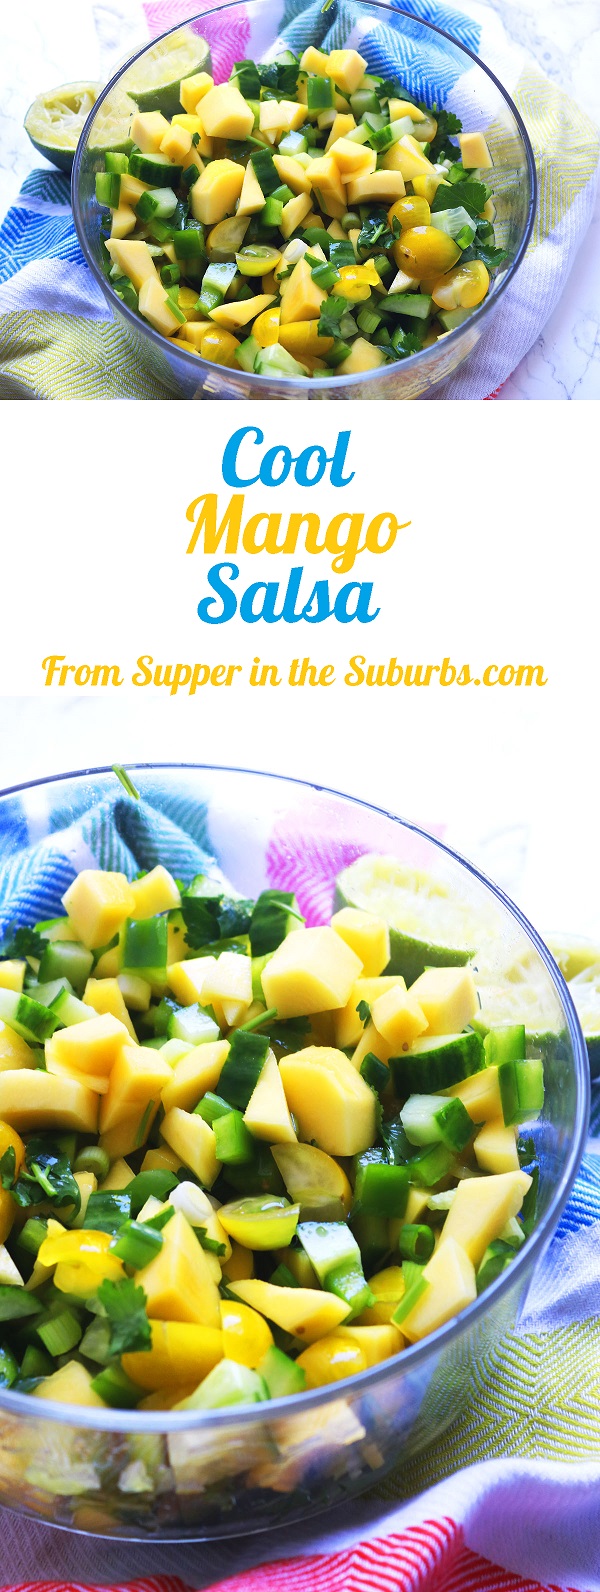 Cool Mango Salsa made with ripe mango, yellow tomatoes, spring oniones, coriander and cucumber